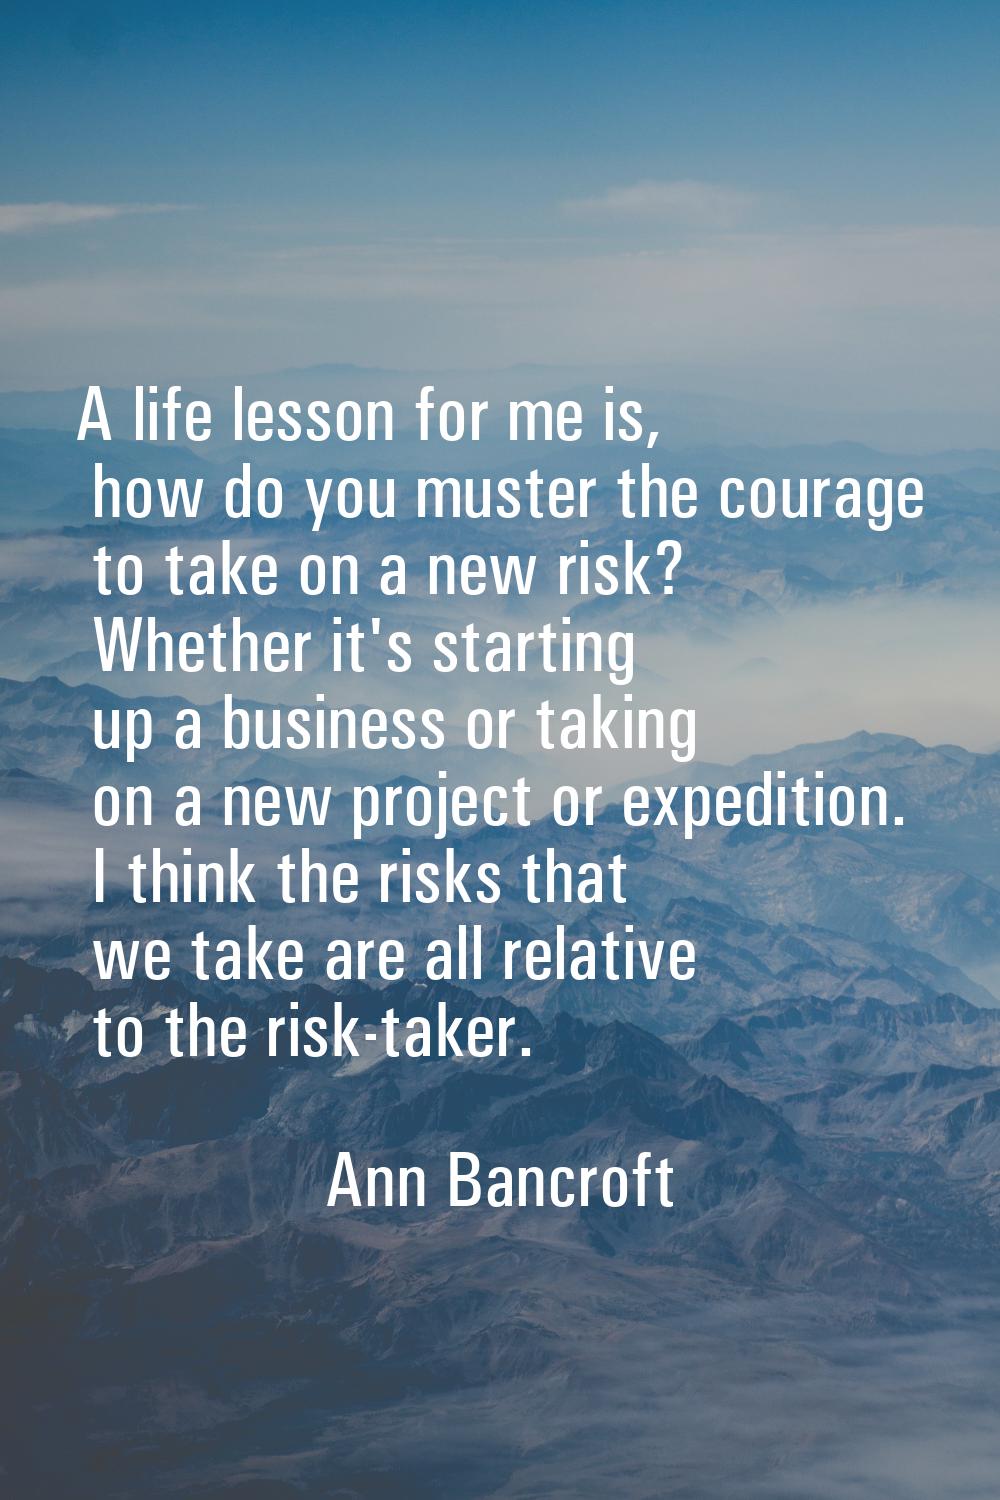 A life lesson for me is, how do you muster the courage to take on a new risk? Whether it's starting